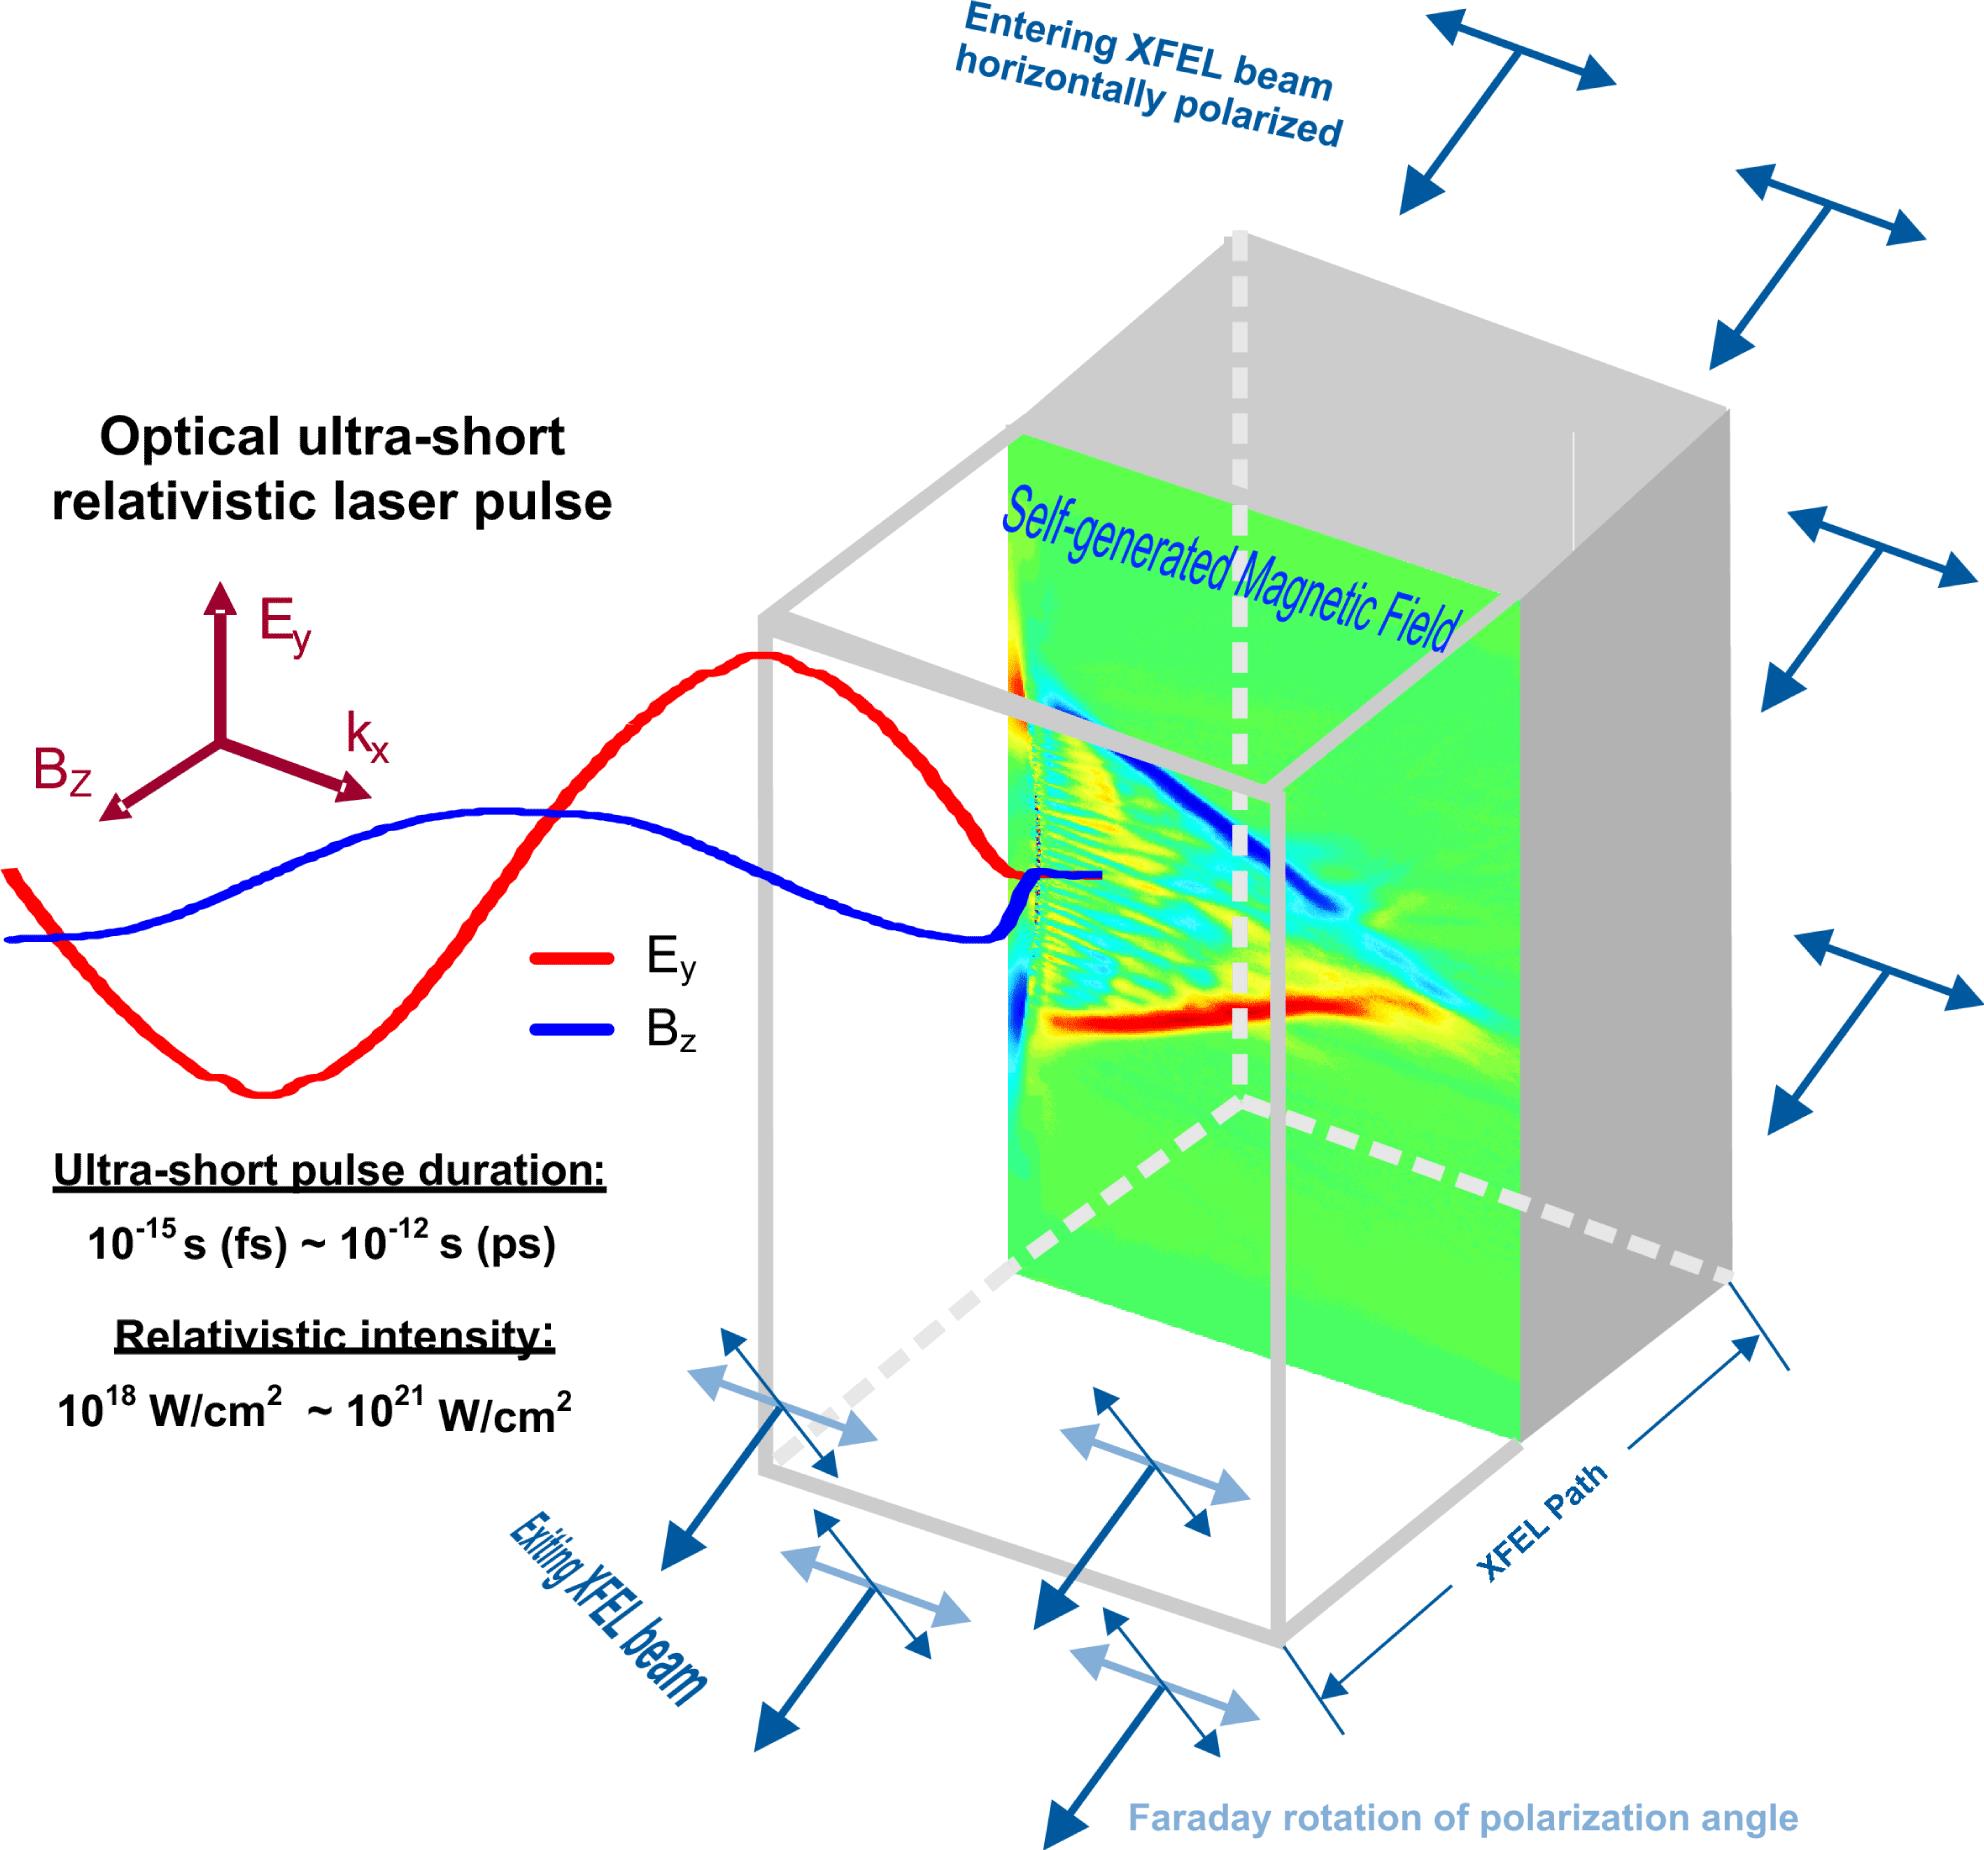 An illustrated experimental setup of strong magnetic field generation by interaction of an ultra-short relativistic optical laser pulse with solid matter, probed by an XFEL via Faraday rotation.